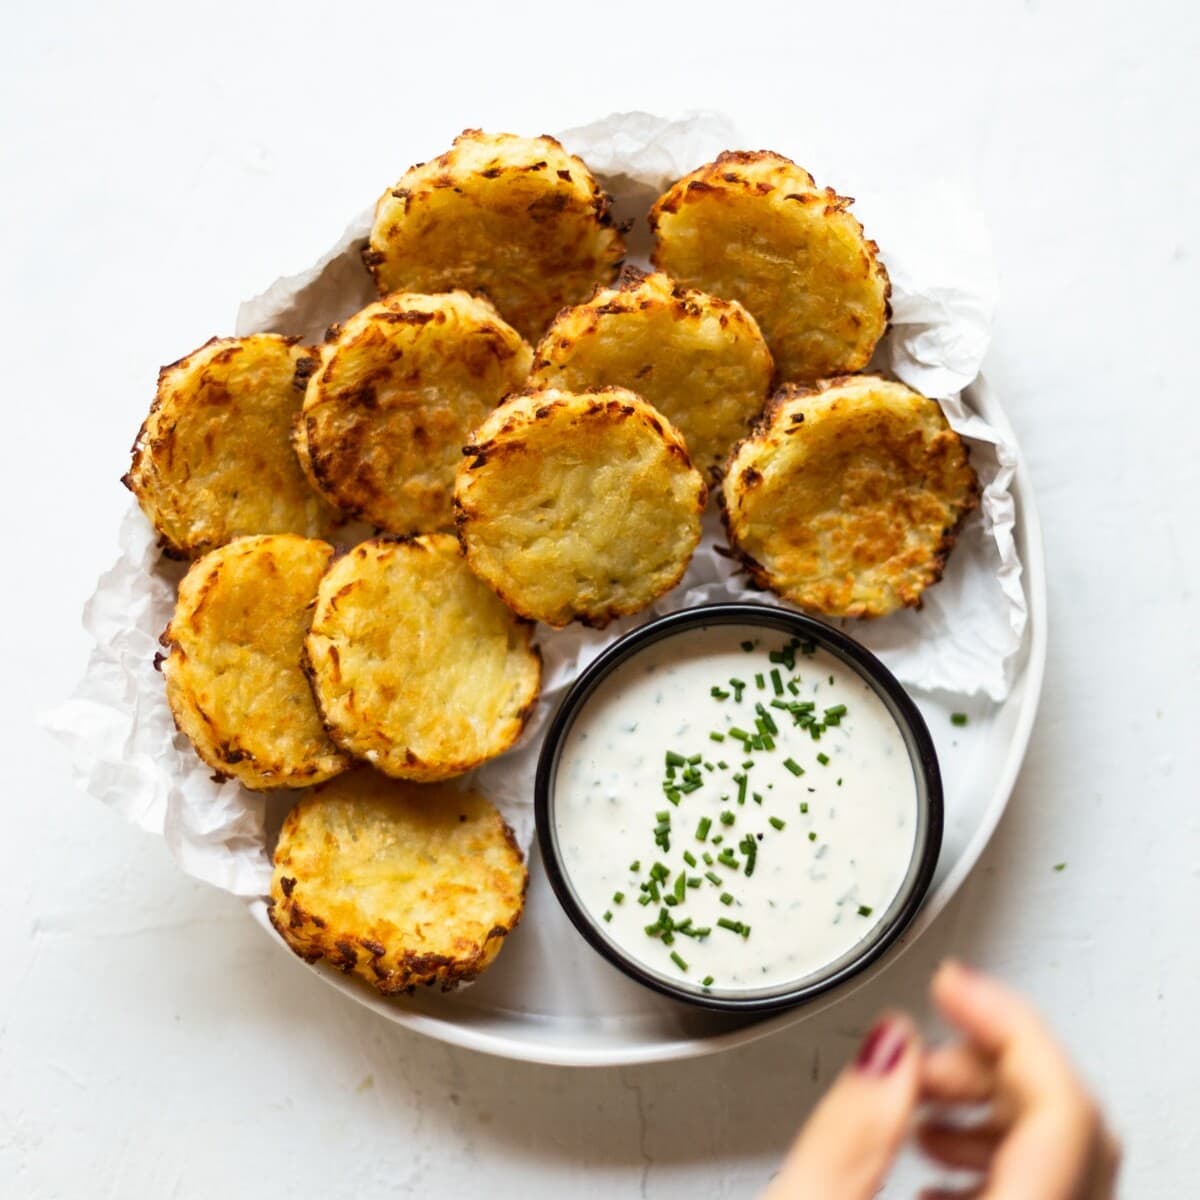 A white ceramic bowl filled with 10 golden, oven baked hash browns, with a separate black bowl of our creamy chive dip.